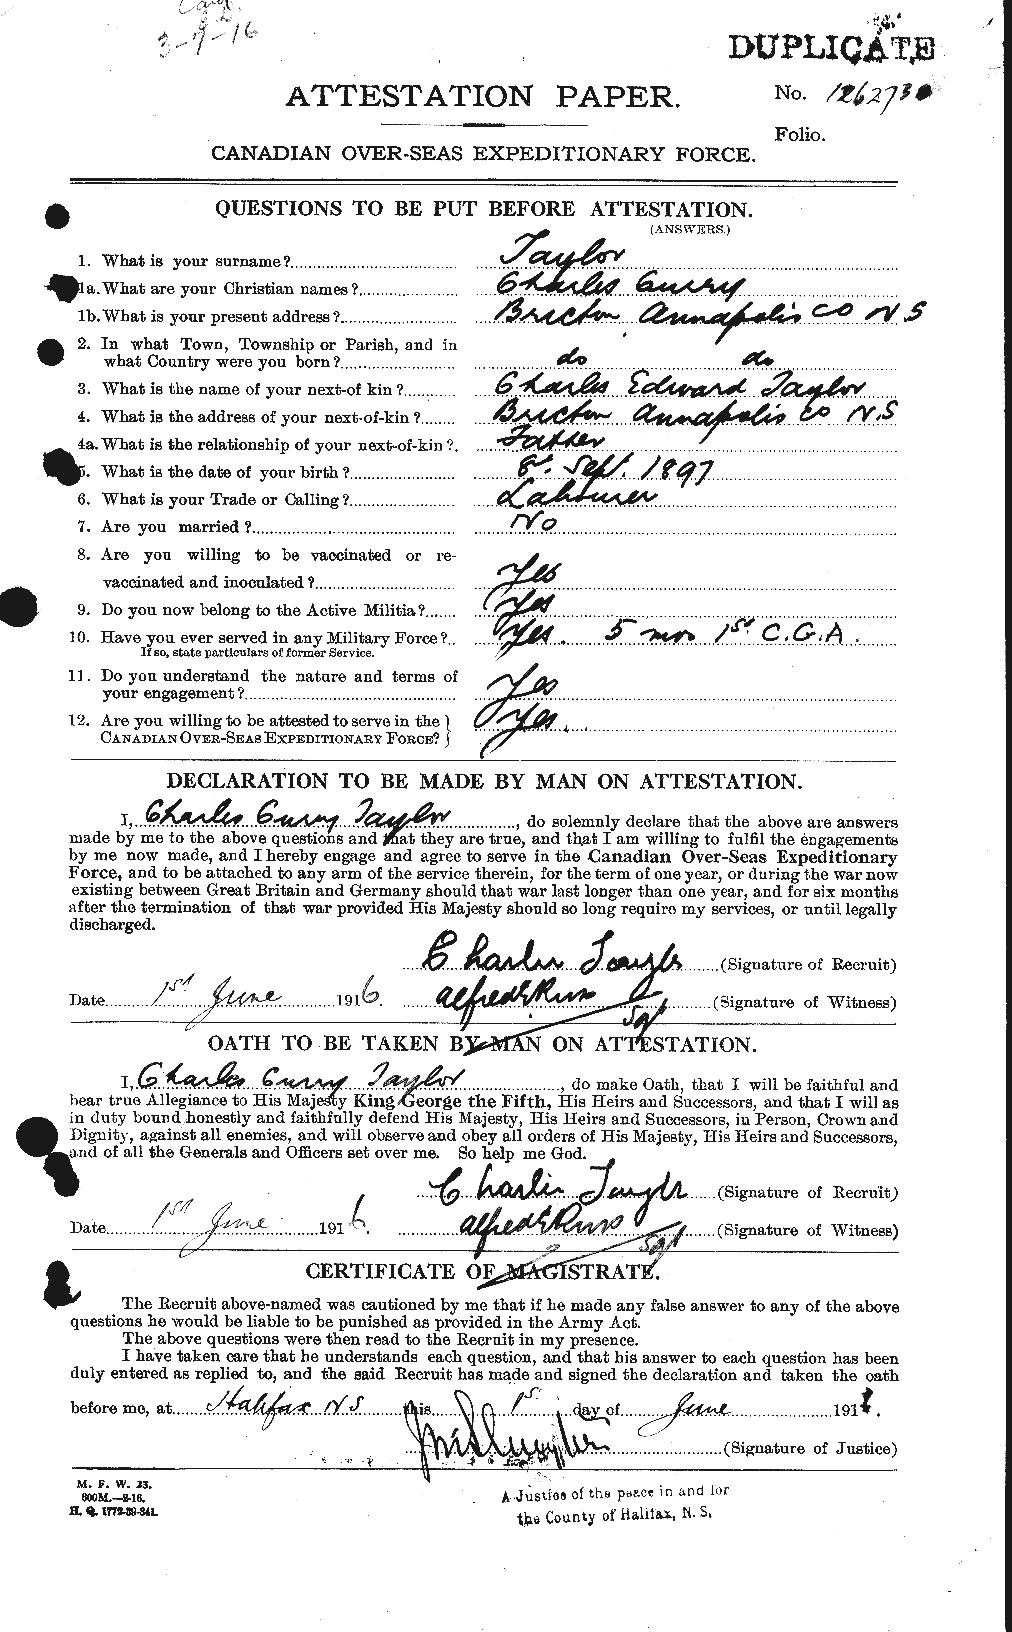 Personnel Records of the First World War - CEF 626836a